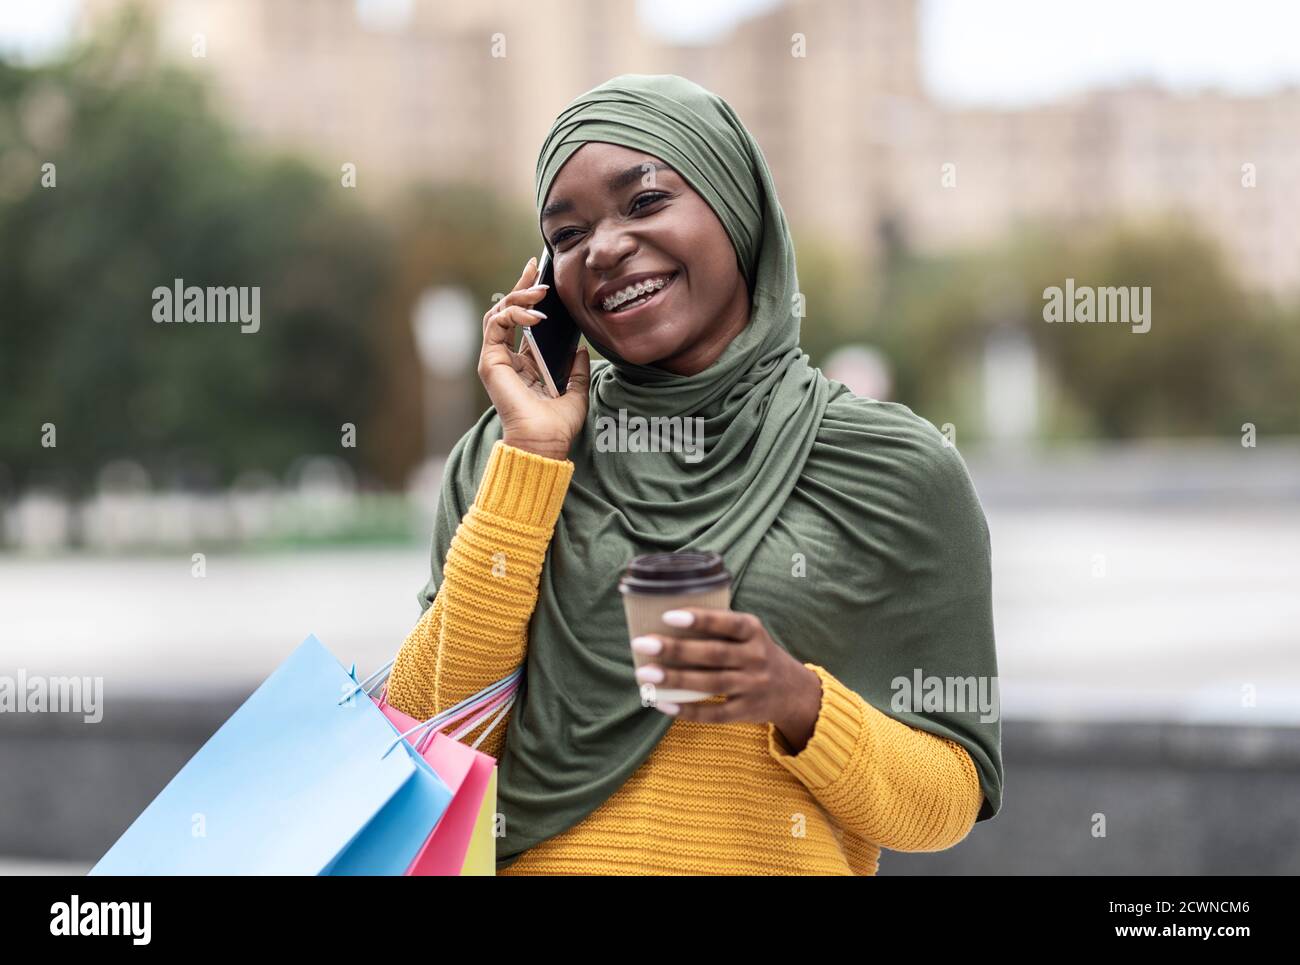 Black Muslim Woman With Shopping Bags And Coffee Talking On Cellphone Outdoors Stock Photo